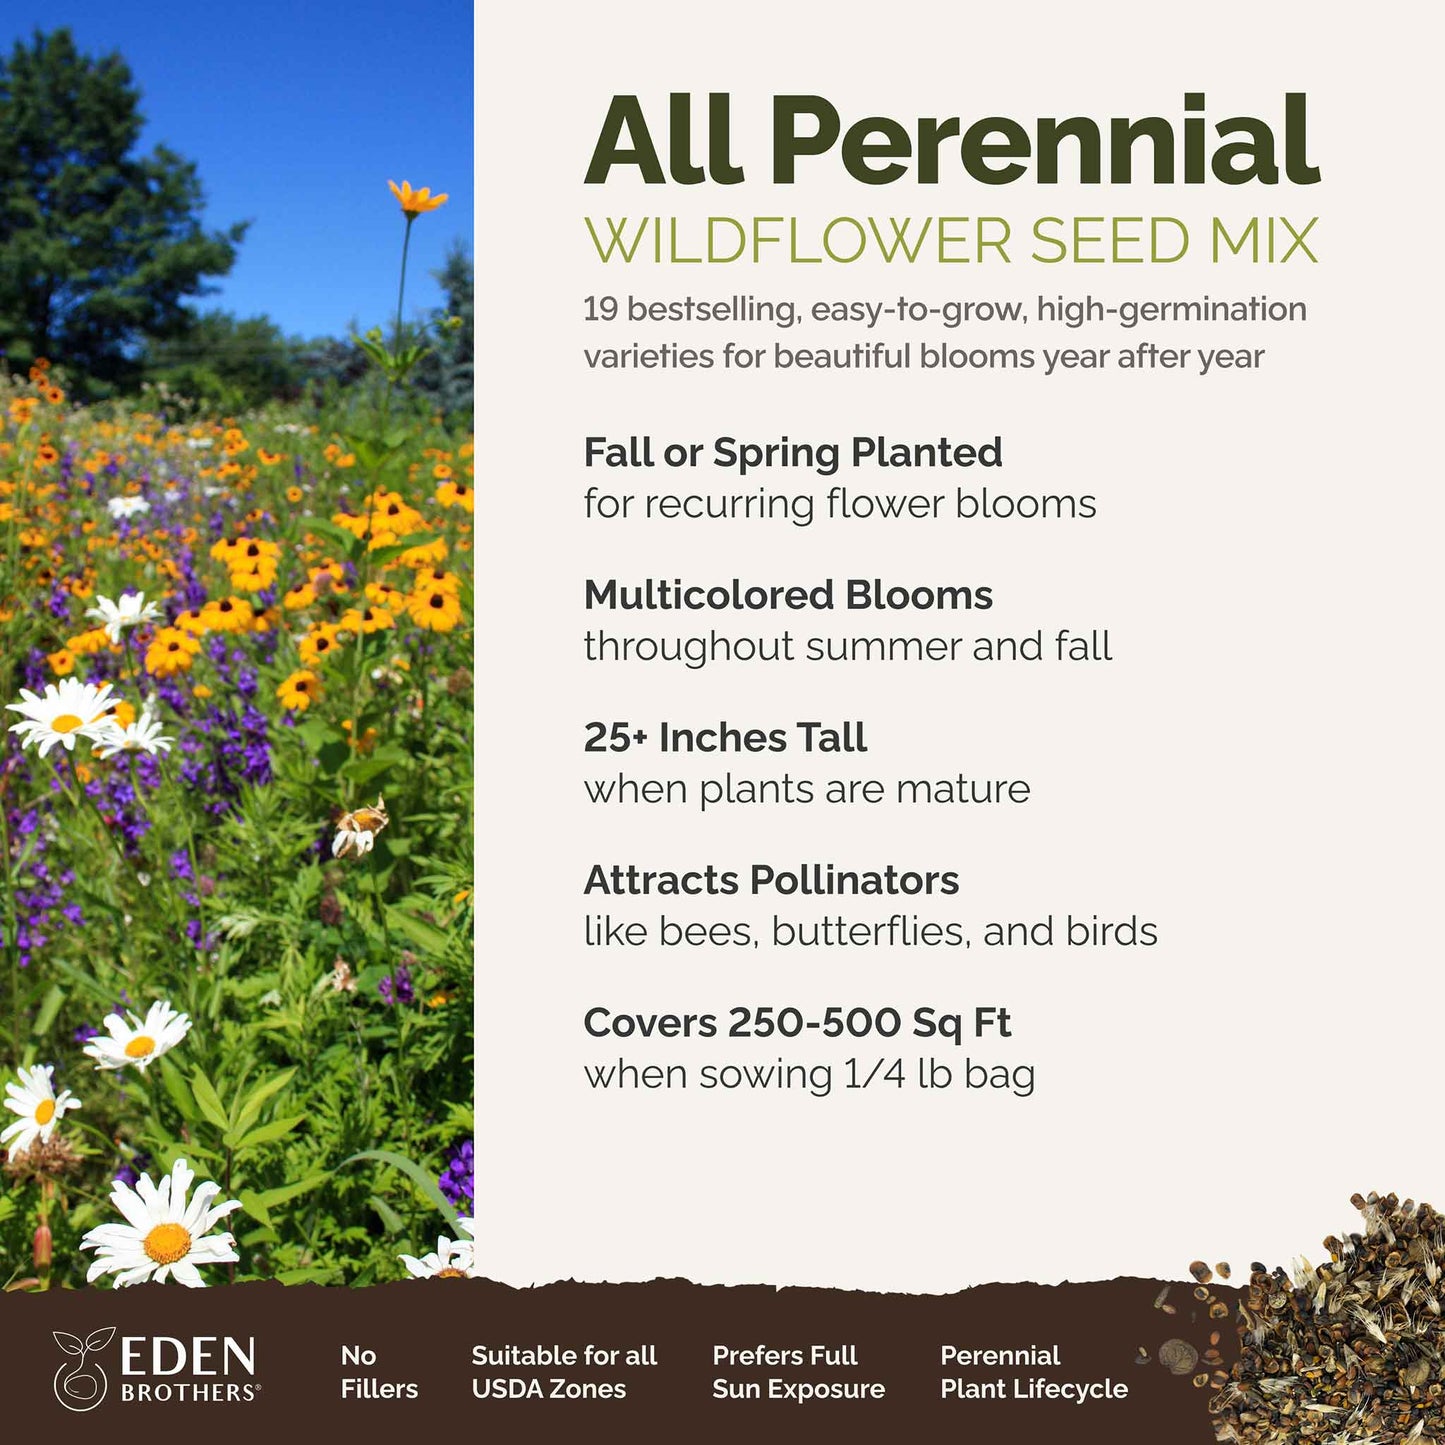 all perennial seed mix facts